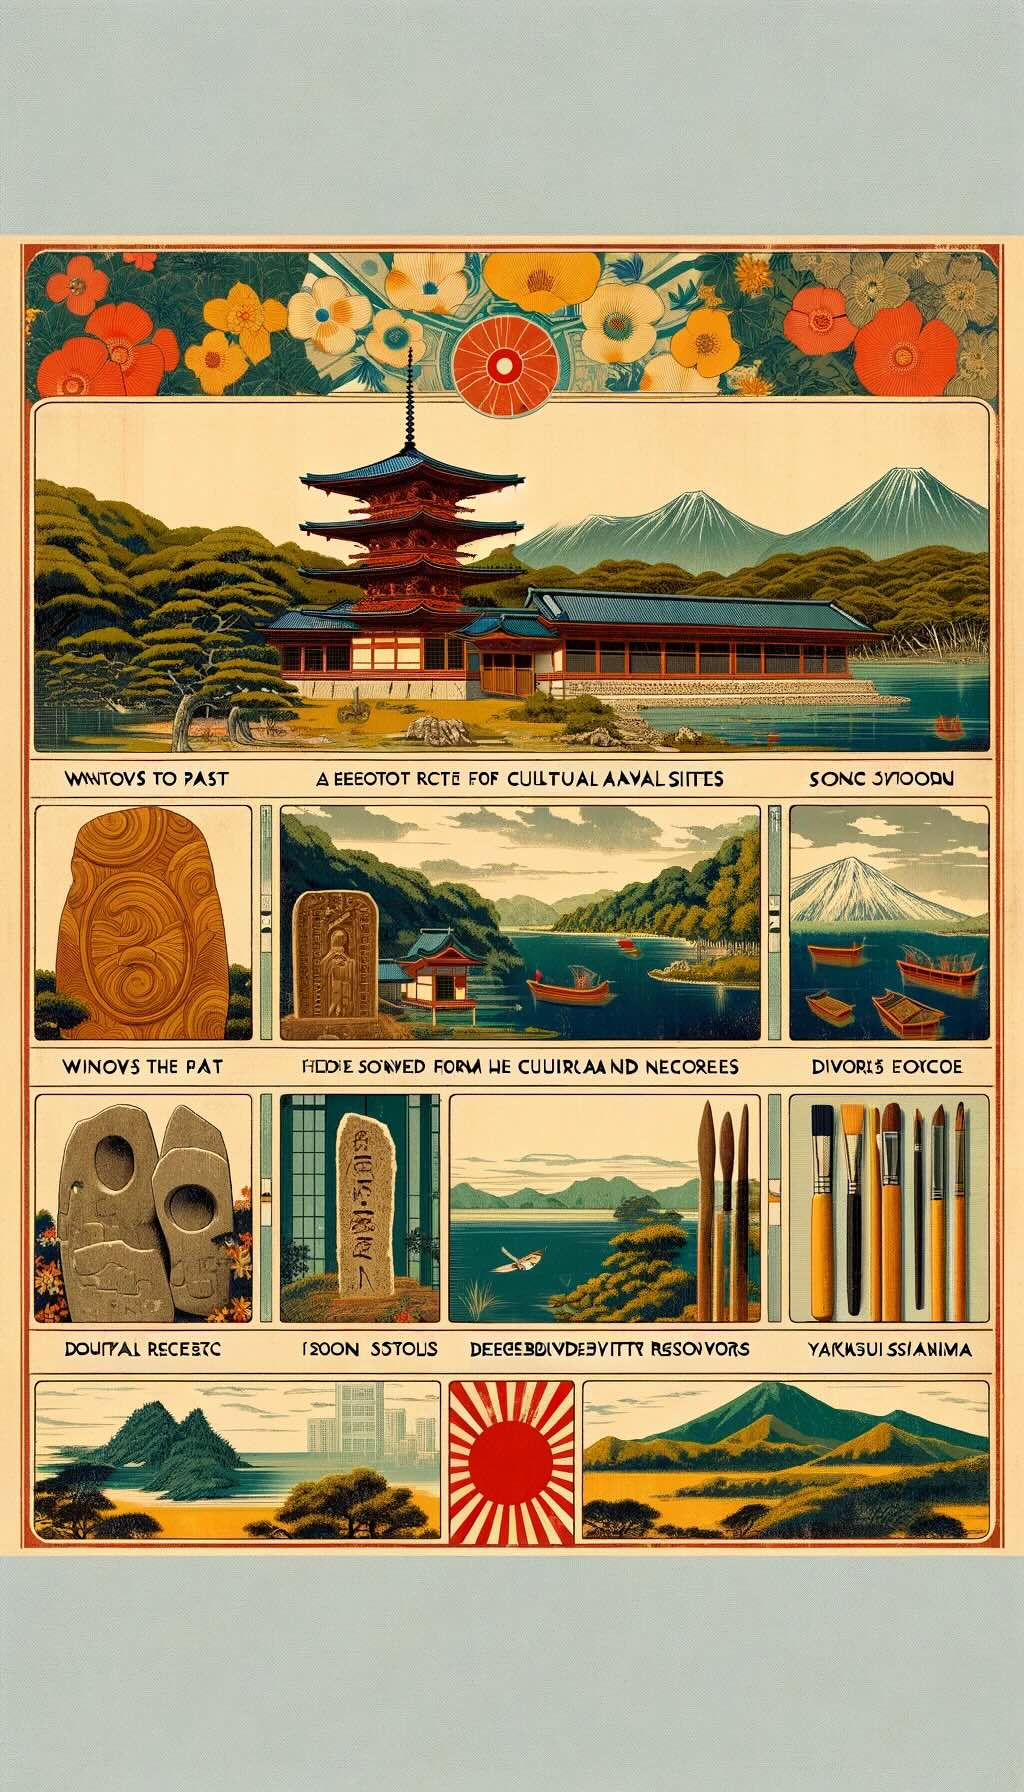 Importance of preserving Japan's cultural and natural sites. It artistically weaves together various elements that embody the historical and ecological significance of these sites